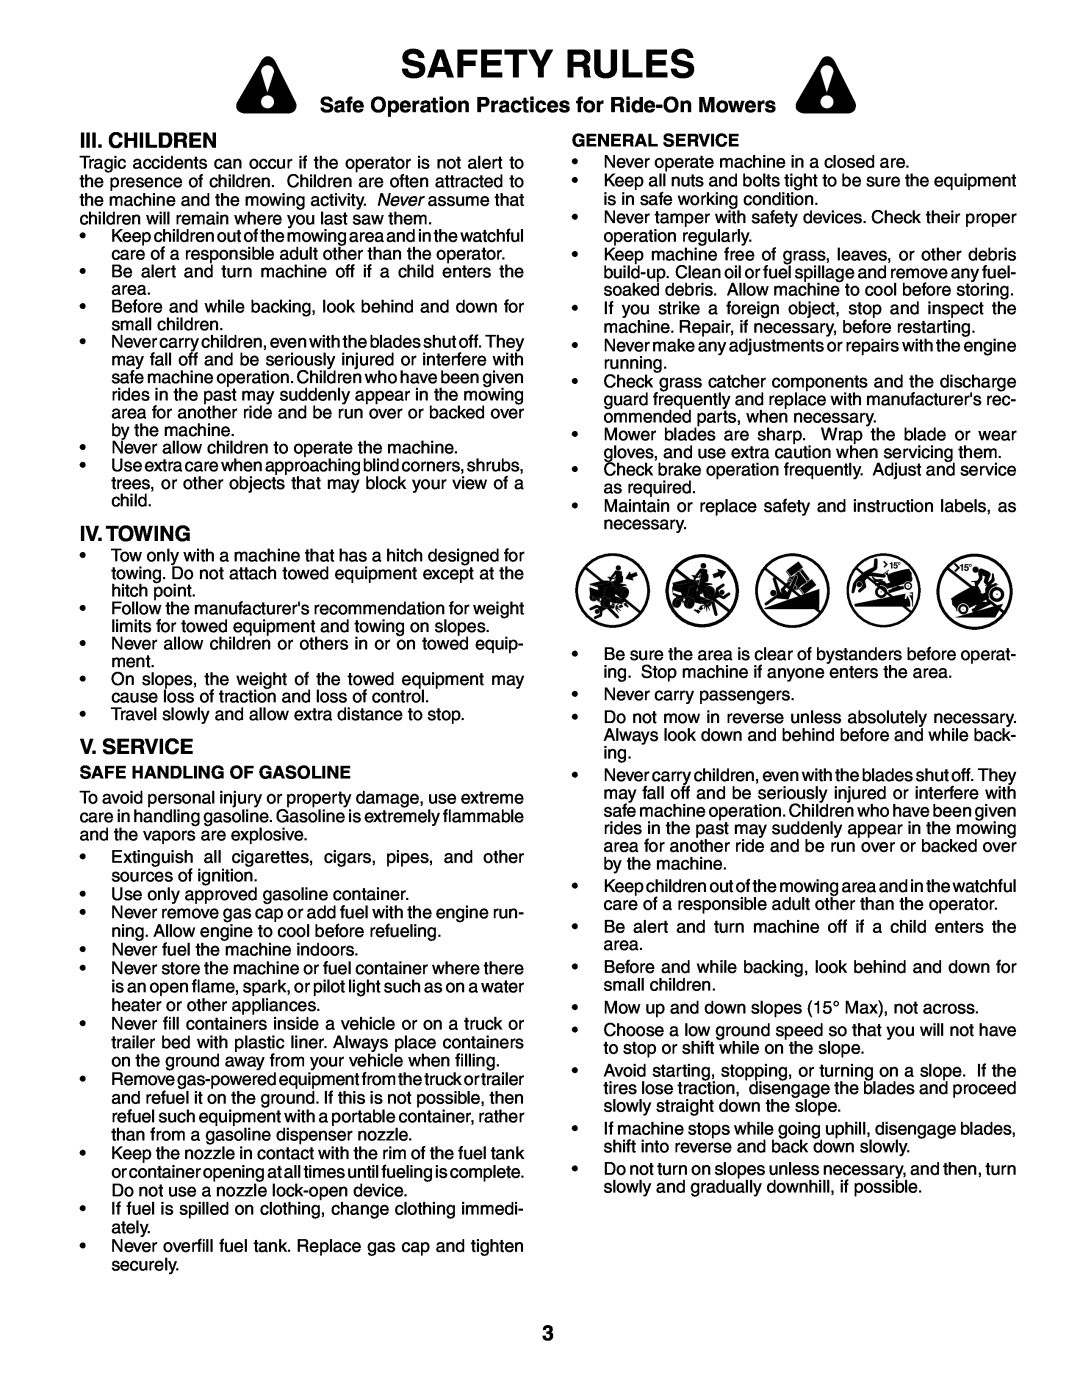 Poulan DB27H48YT manual Iii. Children, Iv. Towing, V. Service, Safety Rules, Safe Operation Practices for Ride-OnMowers 